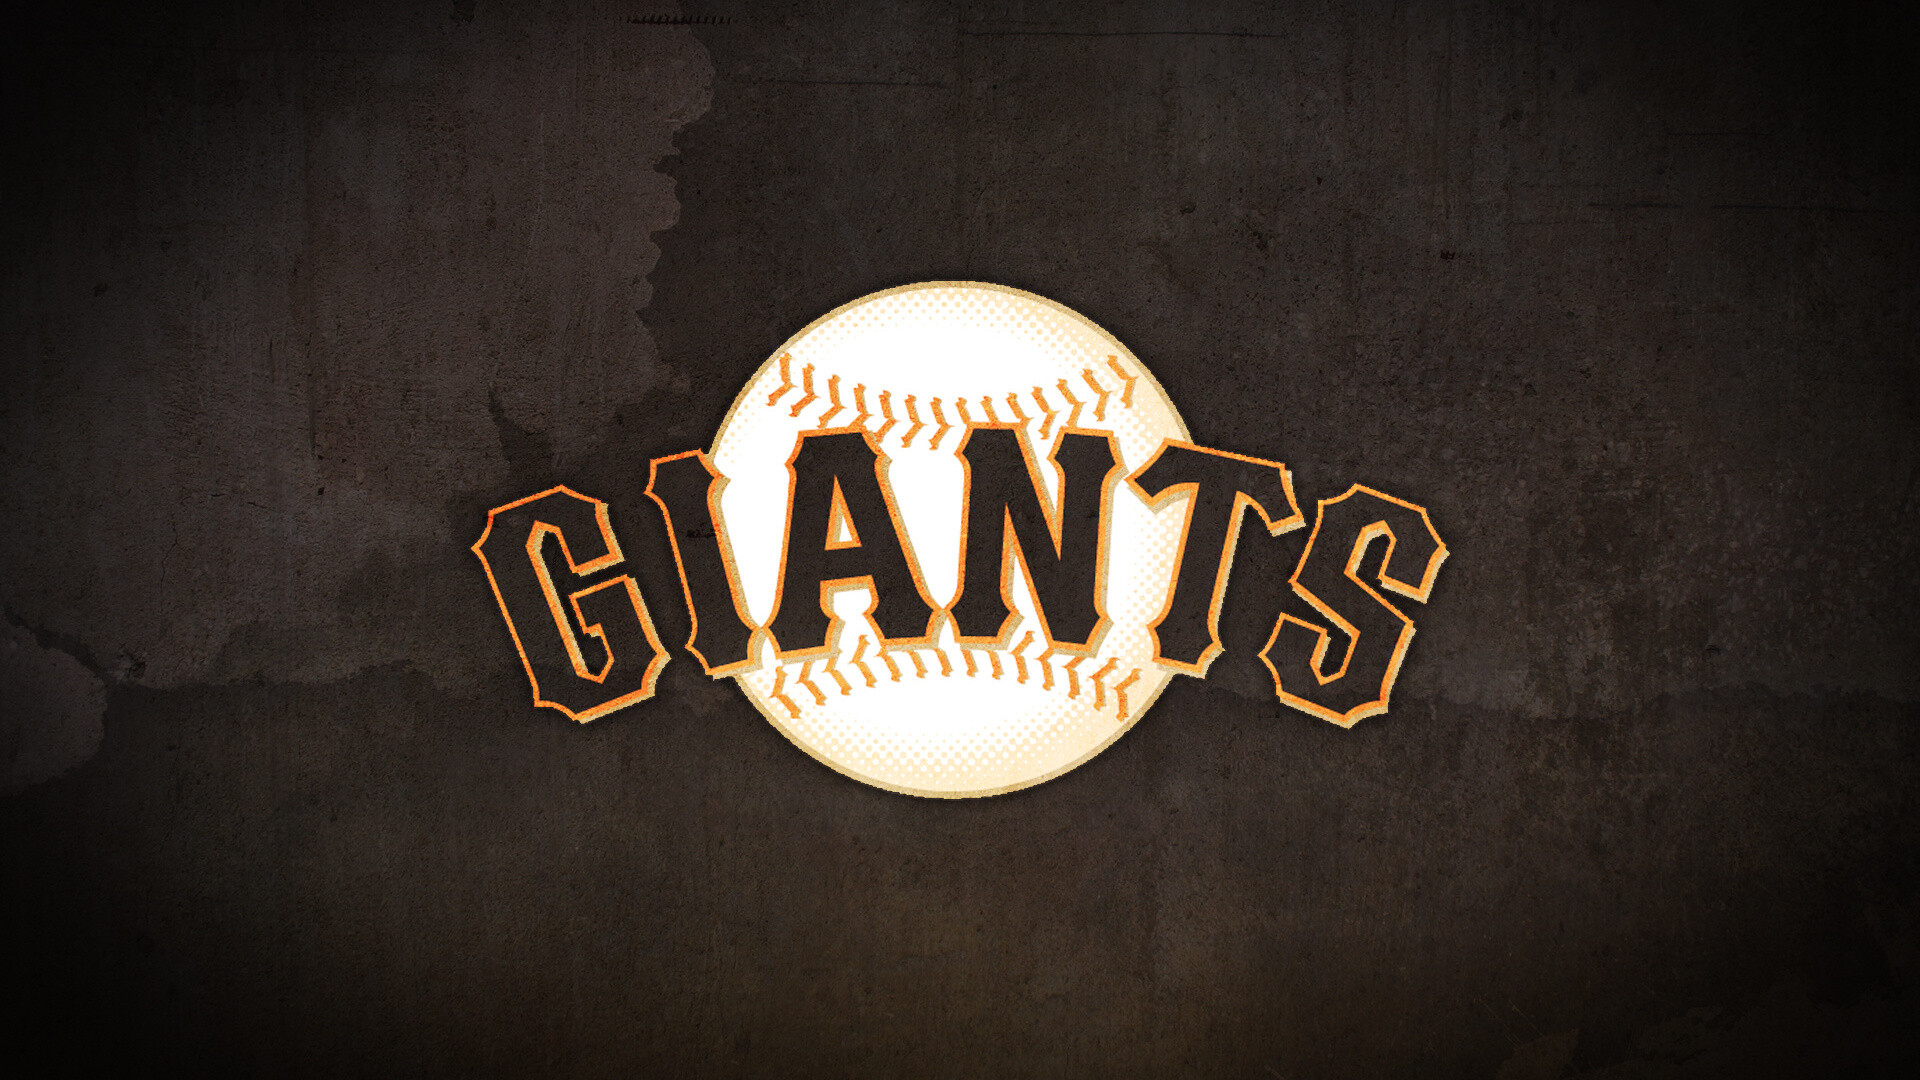 San Francisco Giants: The team faced the Oakland Athletics in the 1989 "Bay Bridge Series". 1920x1080 Full HD Wallpaper.